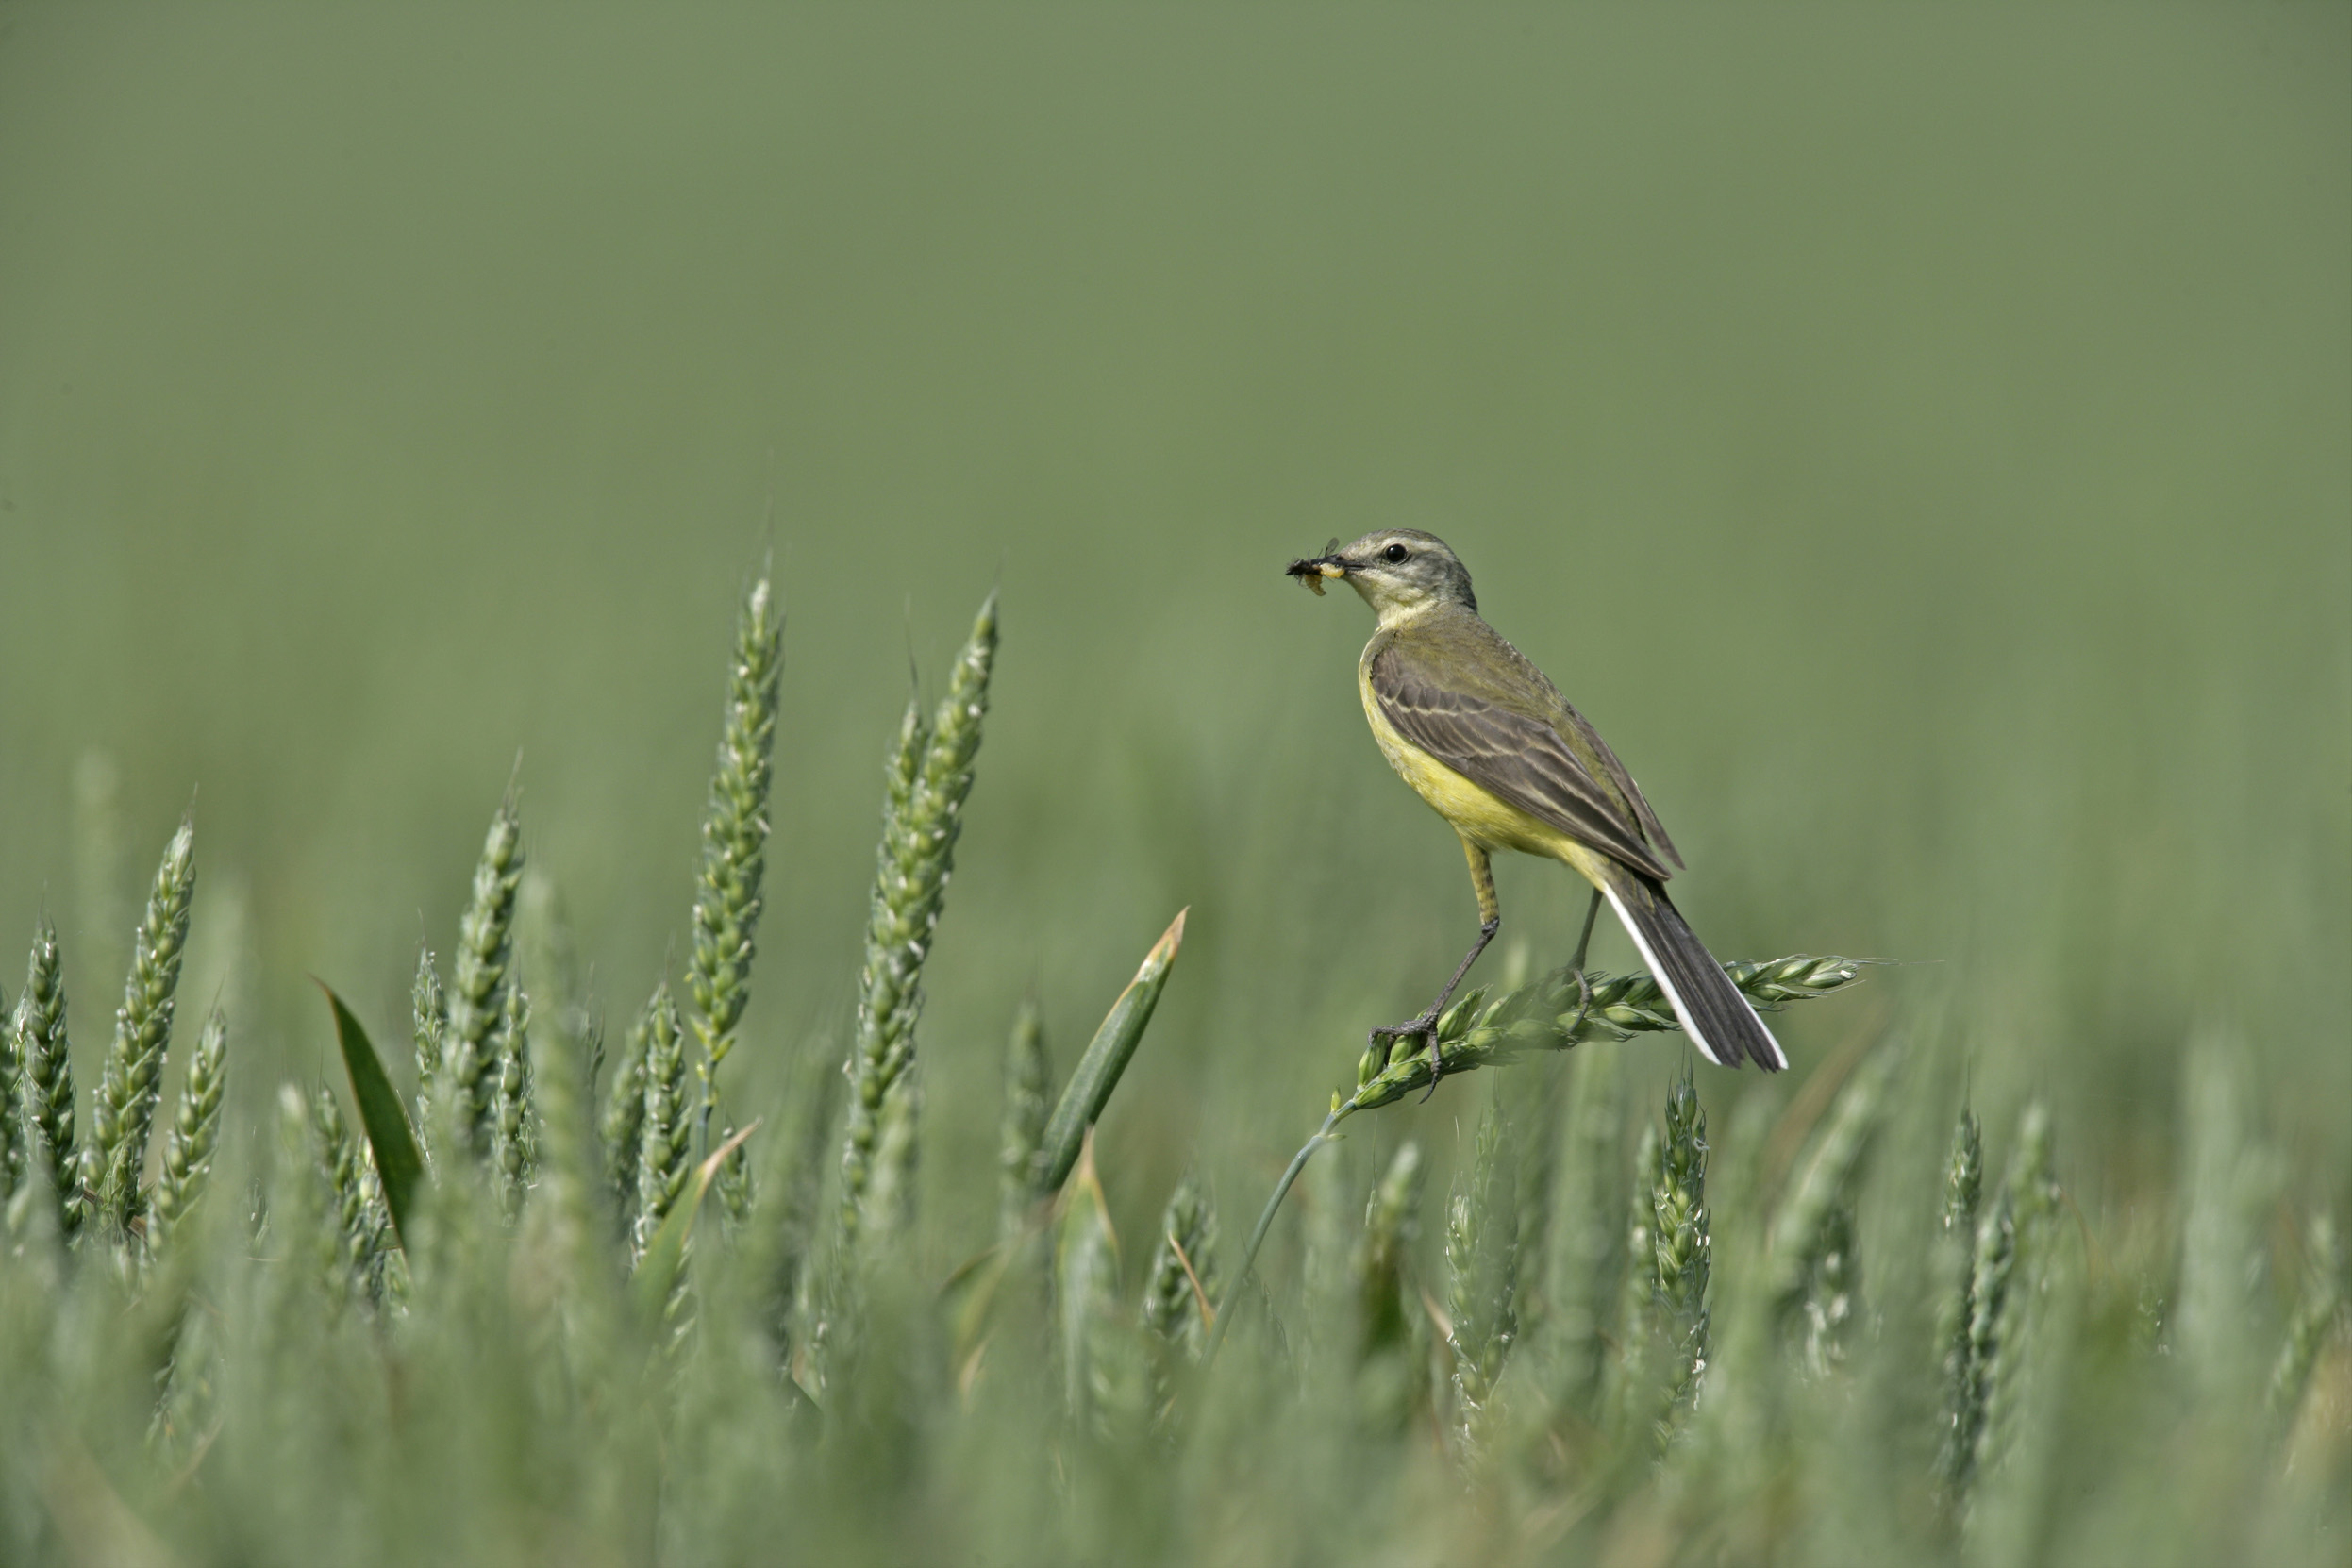 A female Yellow Wagtail stood in the long grass with an insect in her beak.